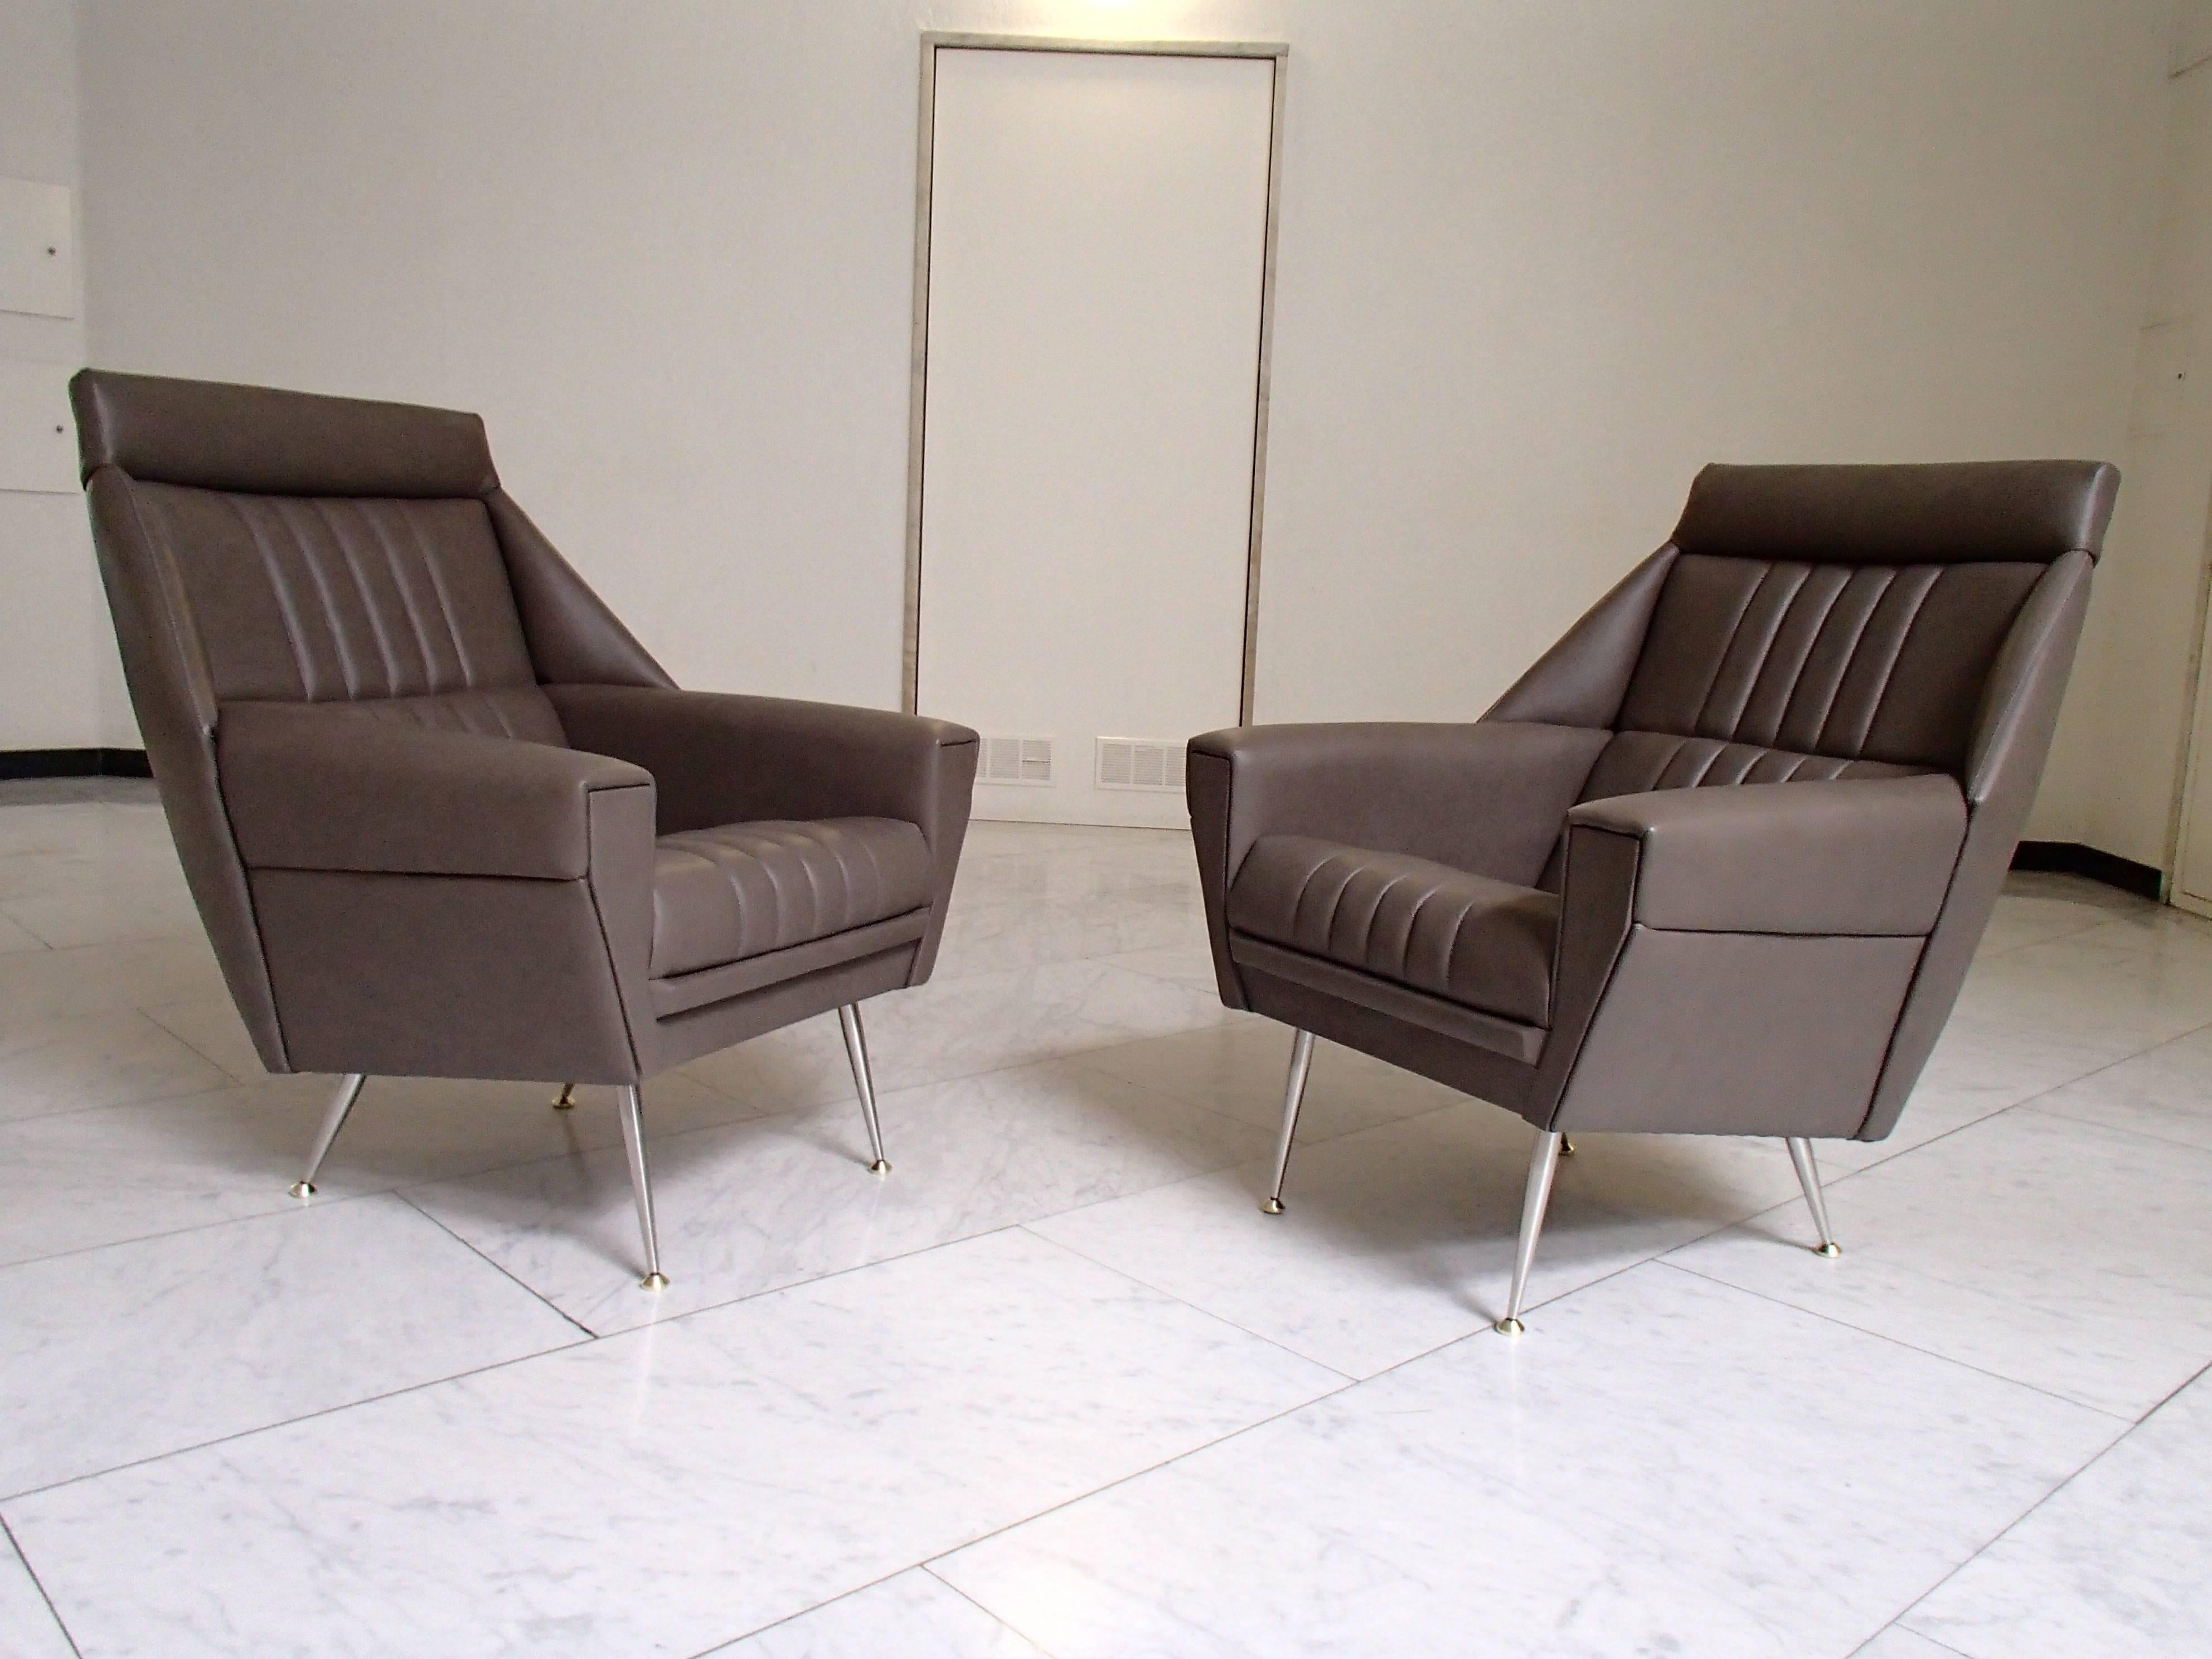 Completely re upholstered and recovered with grey greenish leather brass legs.